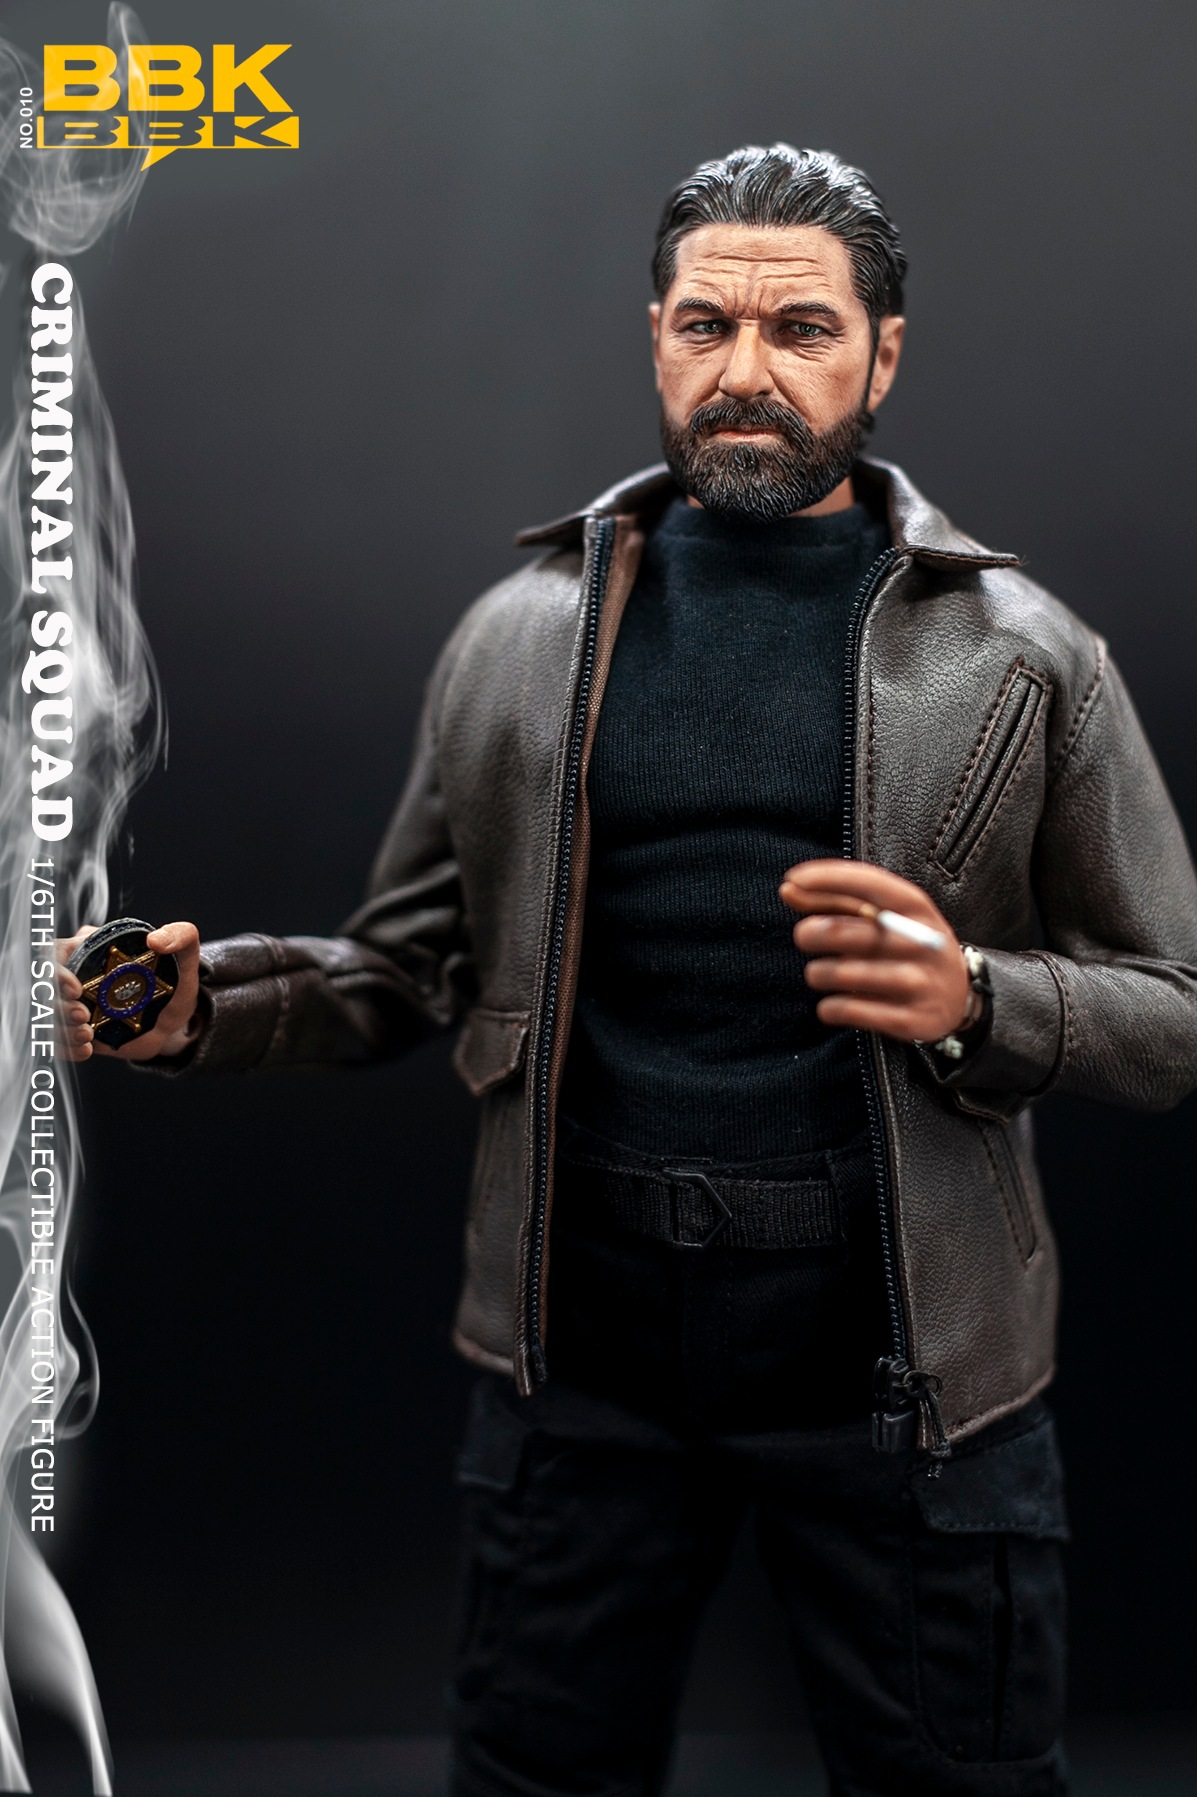 BBK-010 BBK 1/6 scale Hard Boiled Action Figure - ToysFanatic Collections